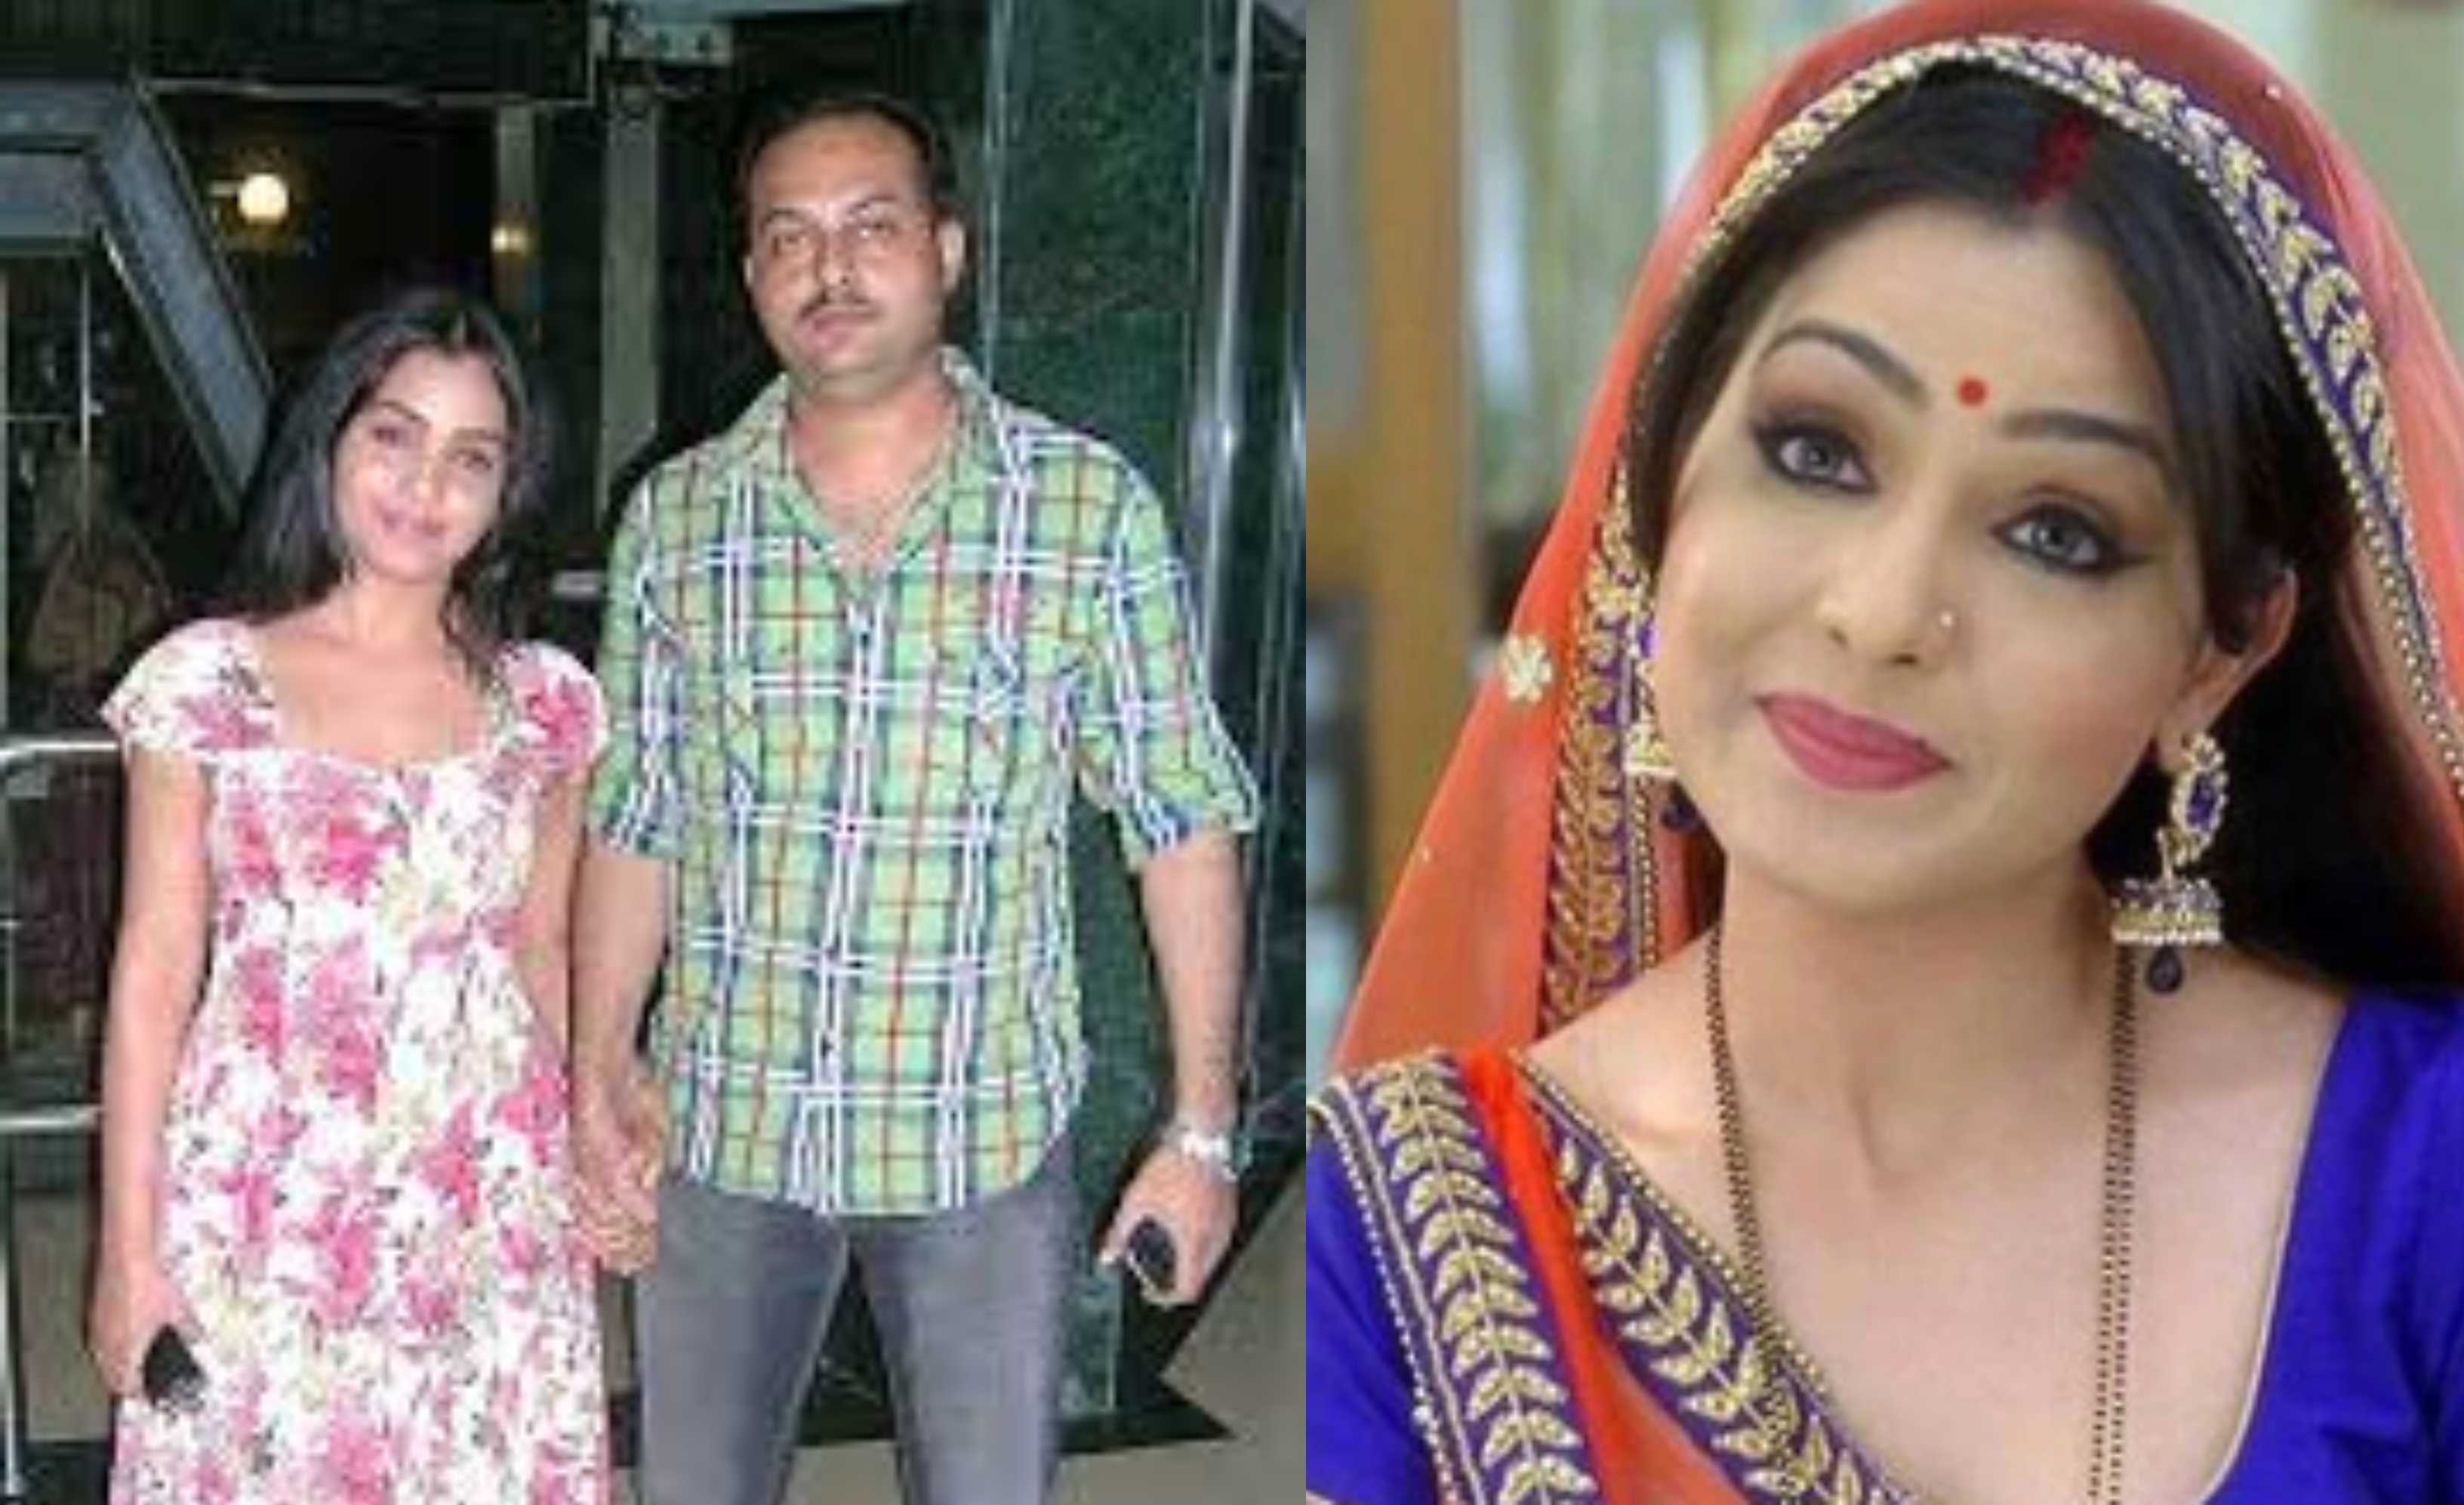 Bhabi Ji Ghar Par Hai fame Shubhangi Atre confirms split from husband after 19 years of marriage, says 'mental stability is paramount'